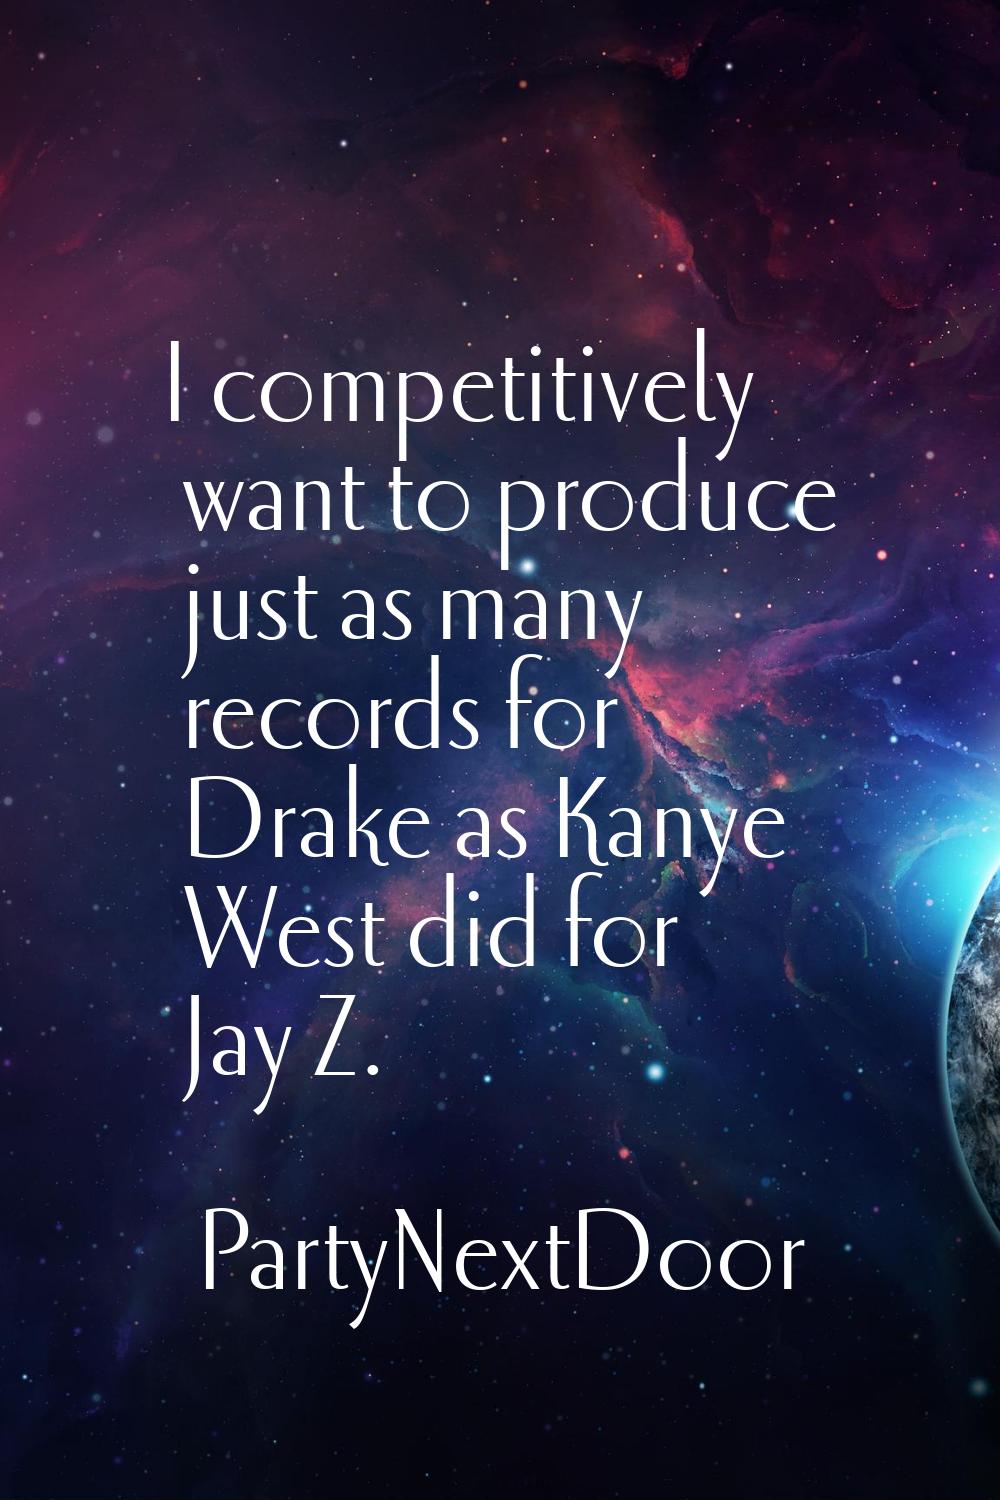 I competitively want to produce just as many records for Drake as Kanye West did for Jay Z.